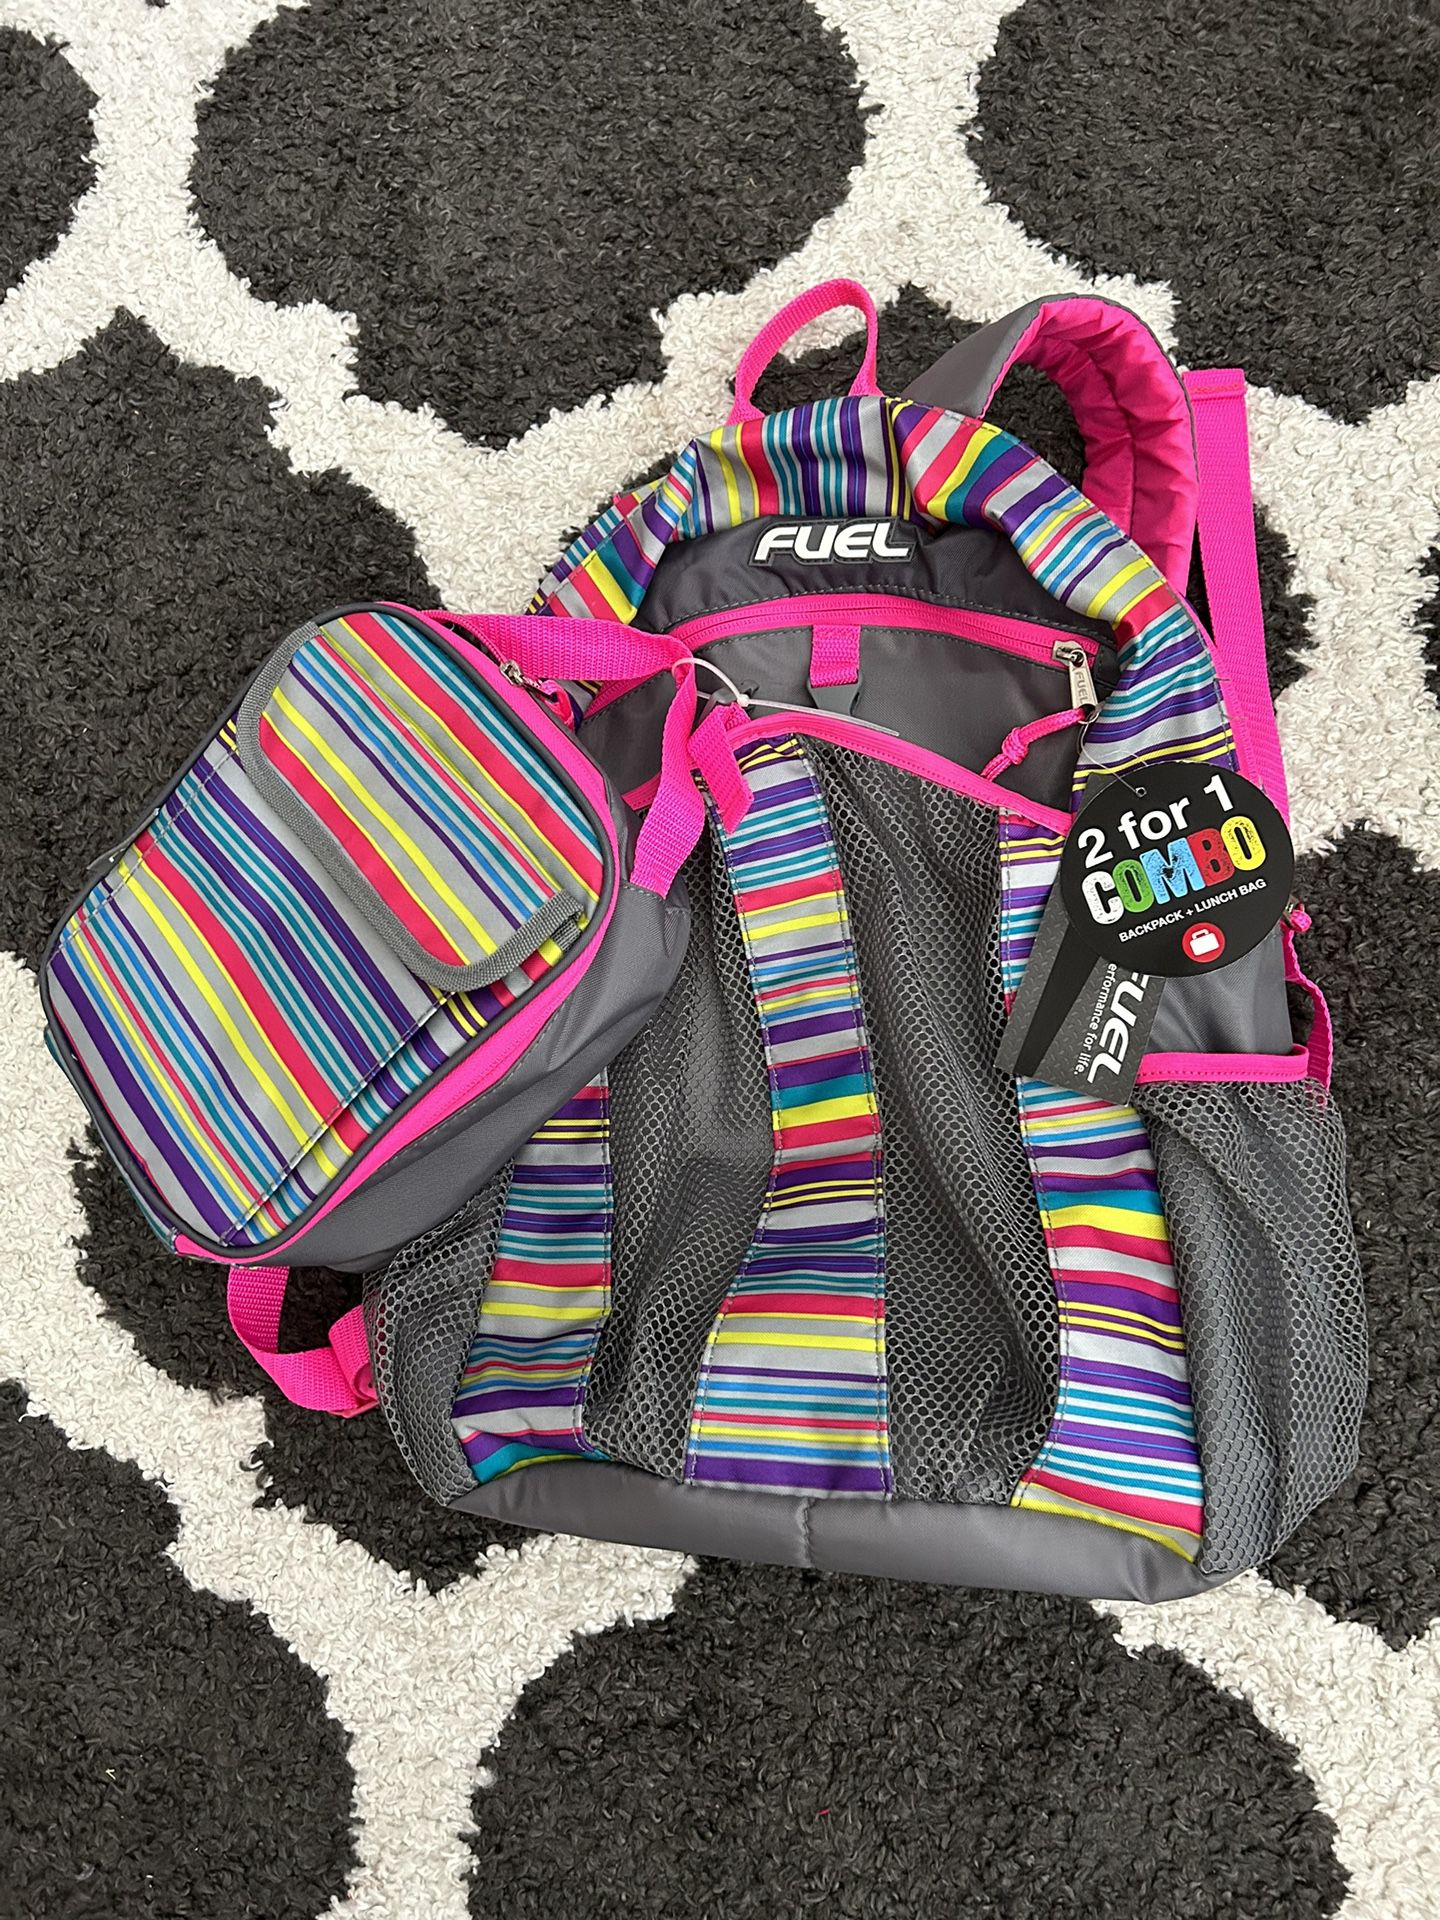 Fuel Kids Backpack 2 In 1 Combo